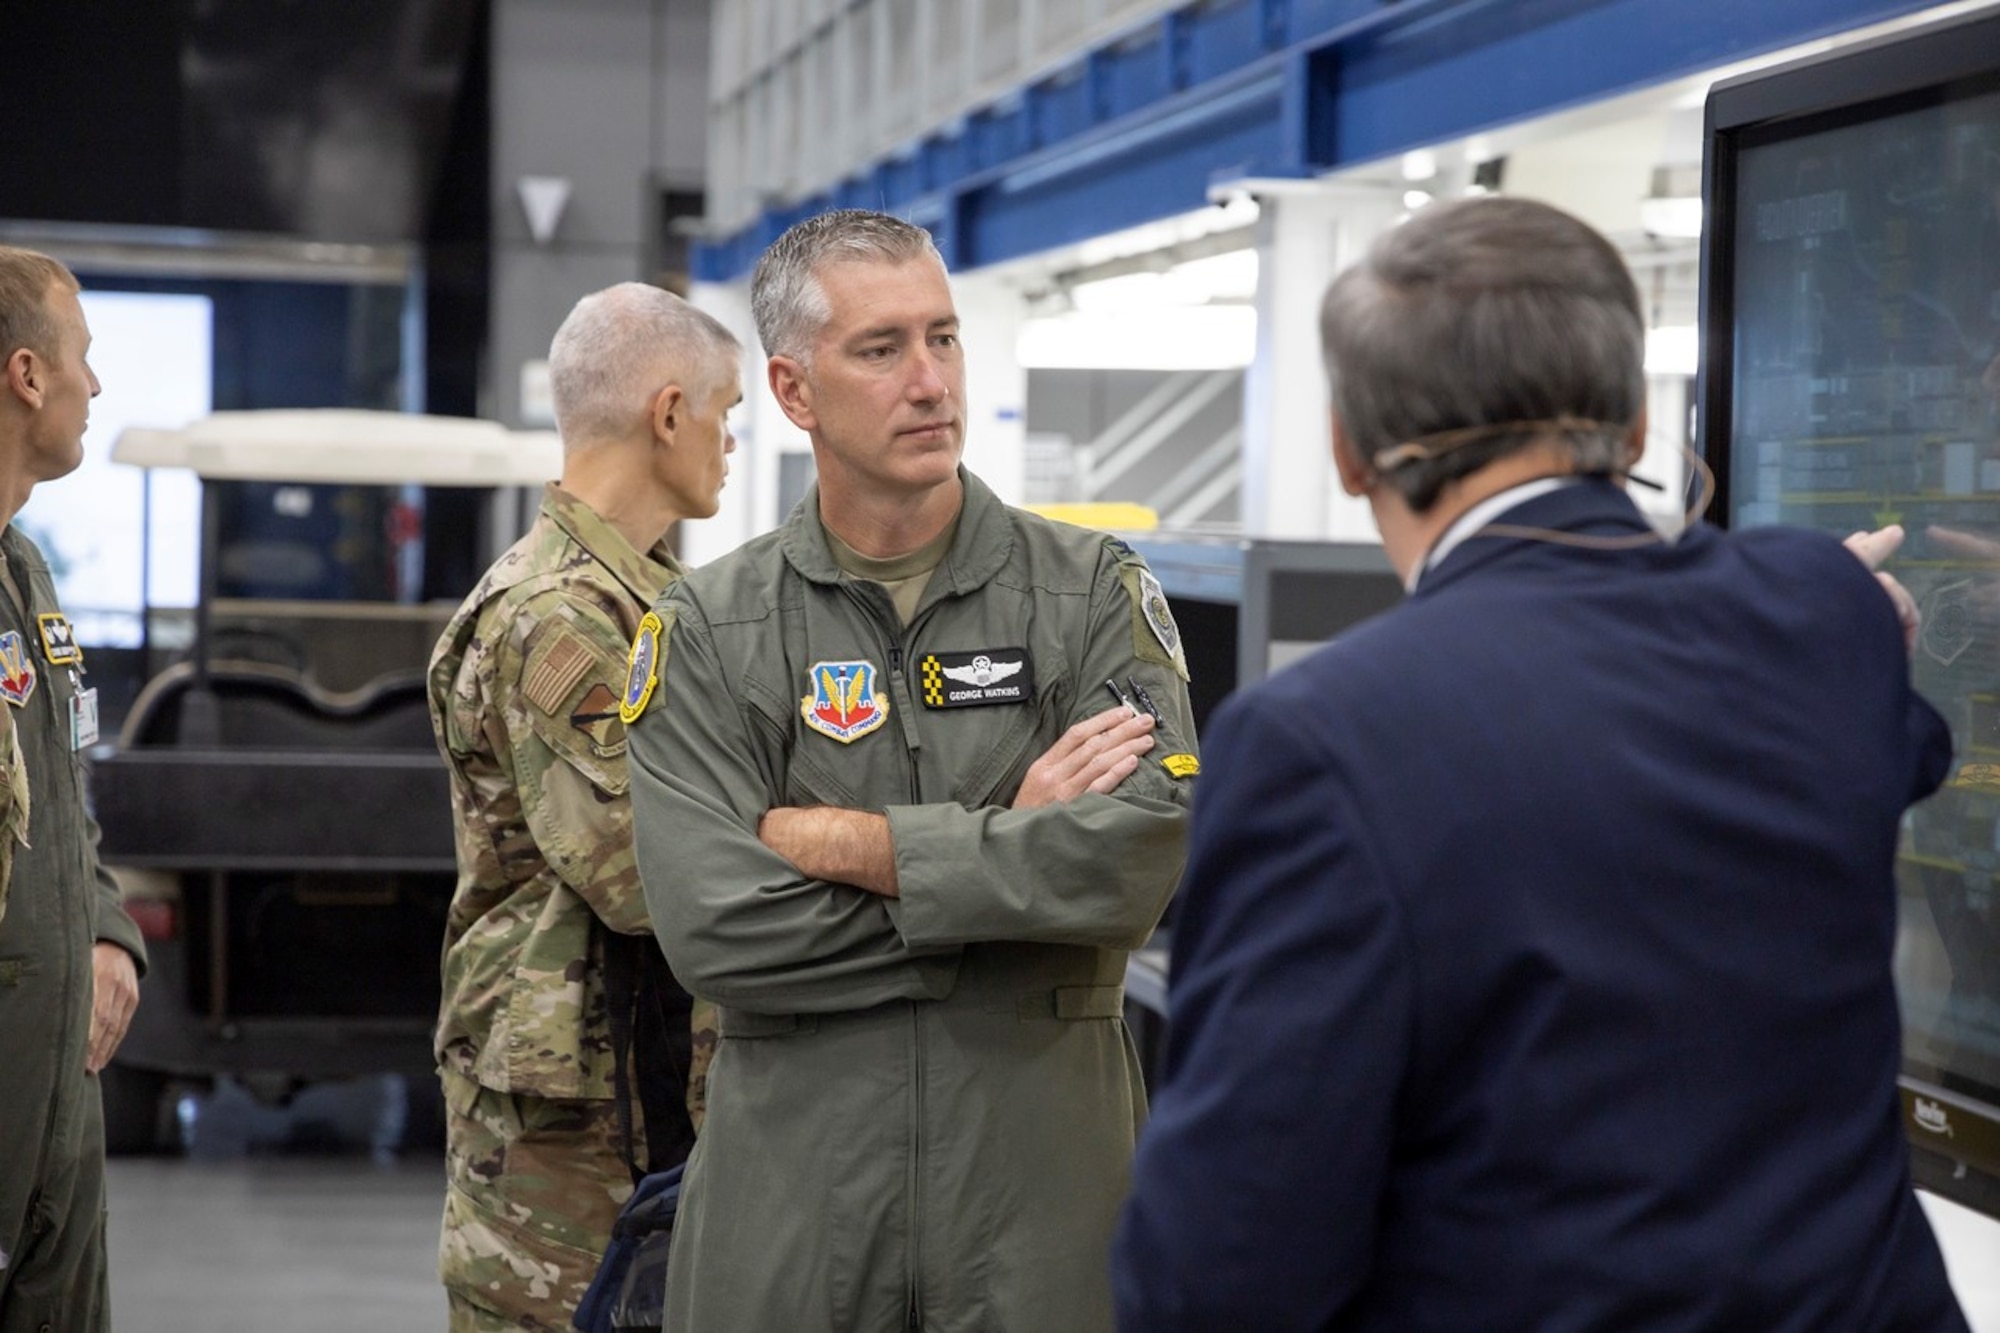 U.S. Air Force Col. George Watkins, 325th Fighter Wing commander, center, is briefed on Lockheed Martin’s F-35 Lightning II facility at the Lockheed Martin factory in Fort Worth, Texas, Oct. 20, 2022.